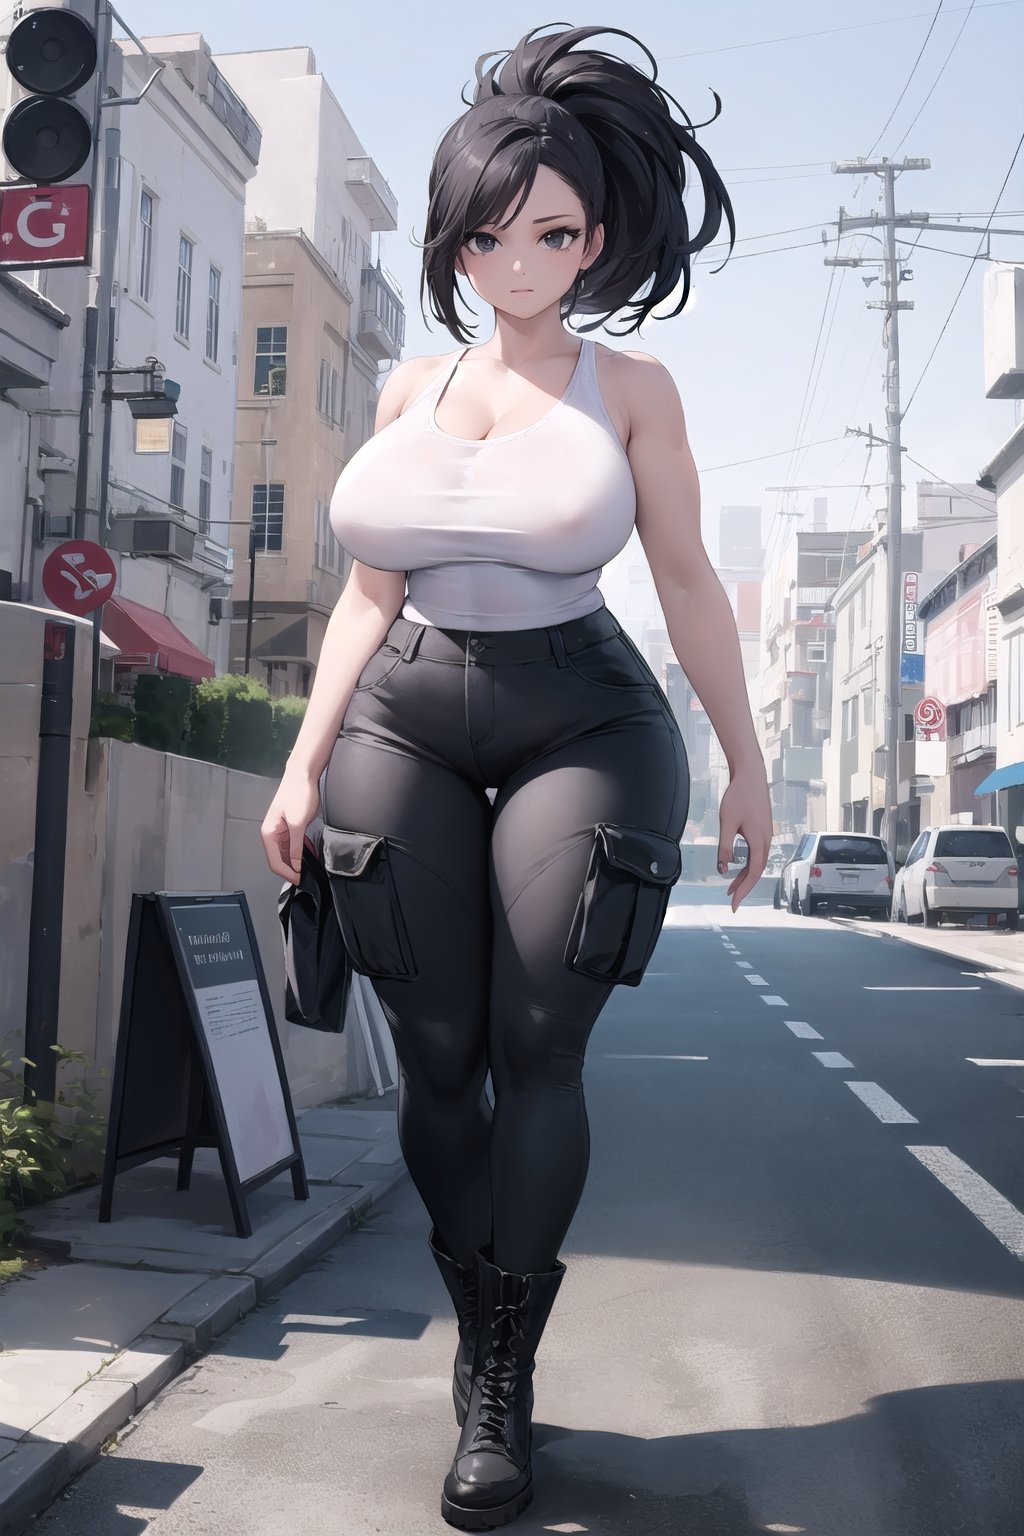 Character: black hair,long hair, black eyes , high ponytail, hair pulled back, curvy, slim waist, thicc thighs, big breasts, muscular women, makeup, shadow eyes, long eyelashes.

Clothes: white tank top, black cargo pants, boots set 

Effect: ((Masterpiece:1.1)), best quality, solo, better_hands, (hands:1.1), realistic, bright eyes.

Background: at city, scenary.

Pose: standing, full body.